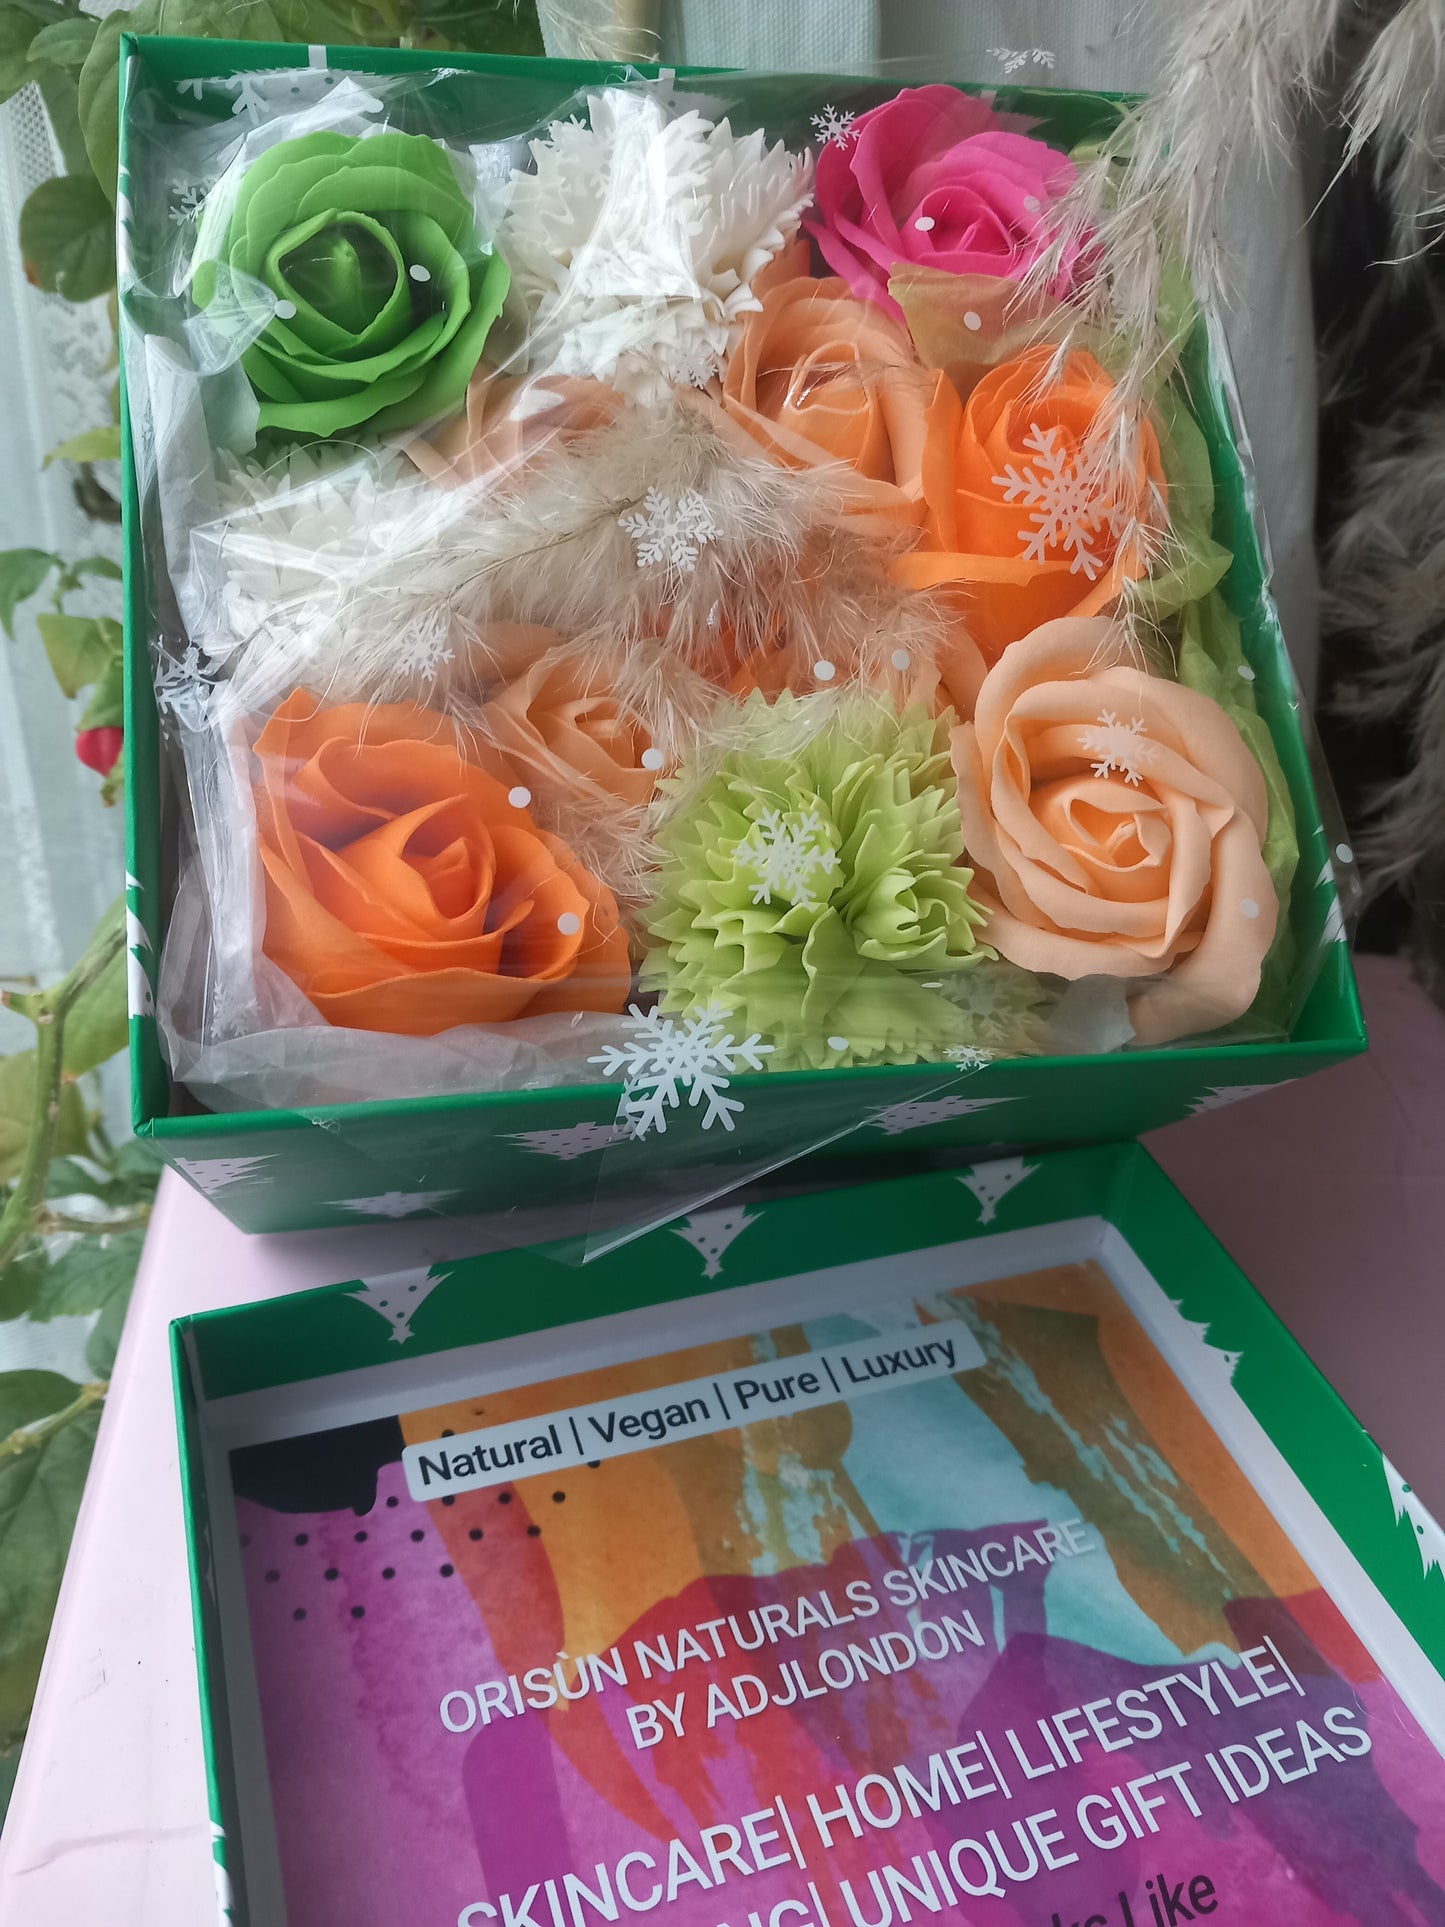 PEACHY SHADE MIX GREEN FLOWER SOAP IN GREEN DISPLAY BOX